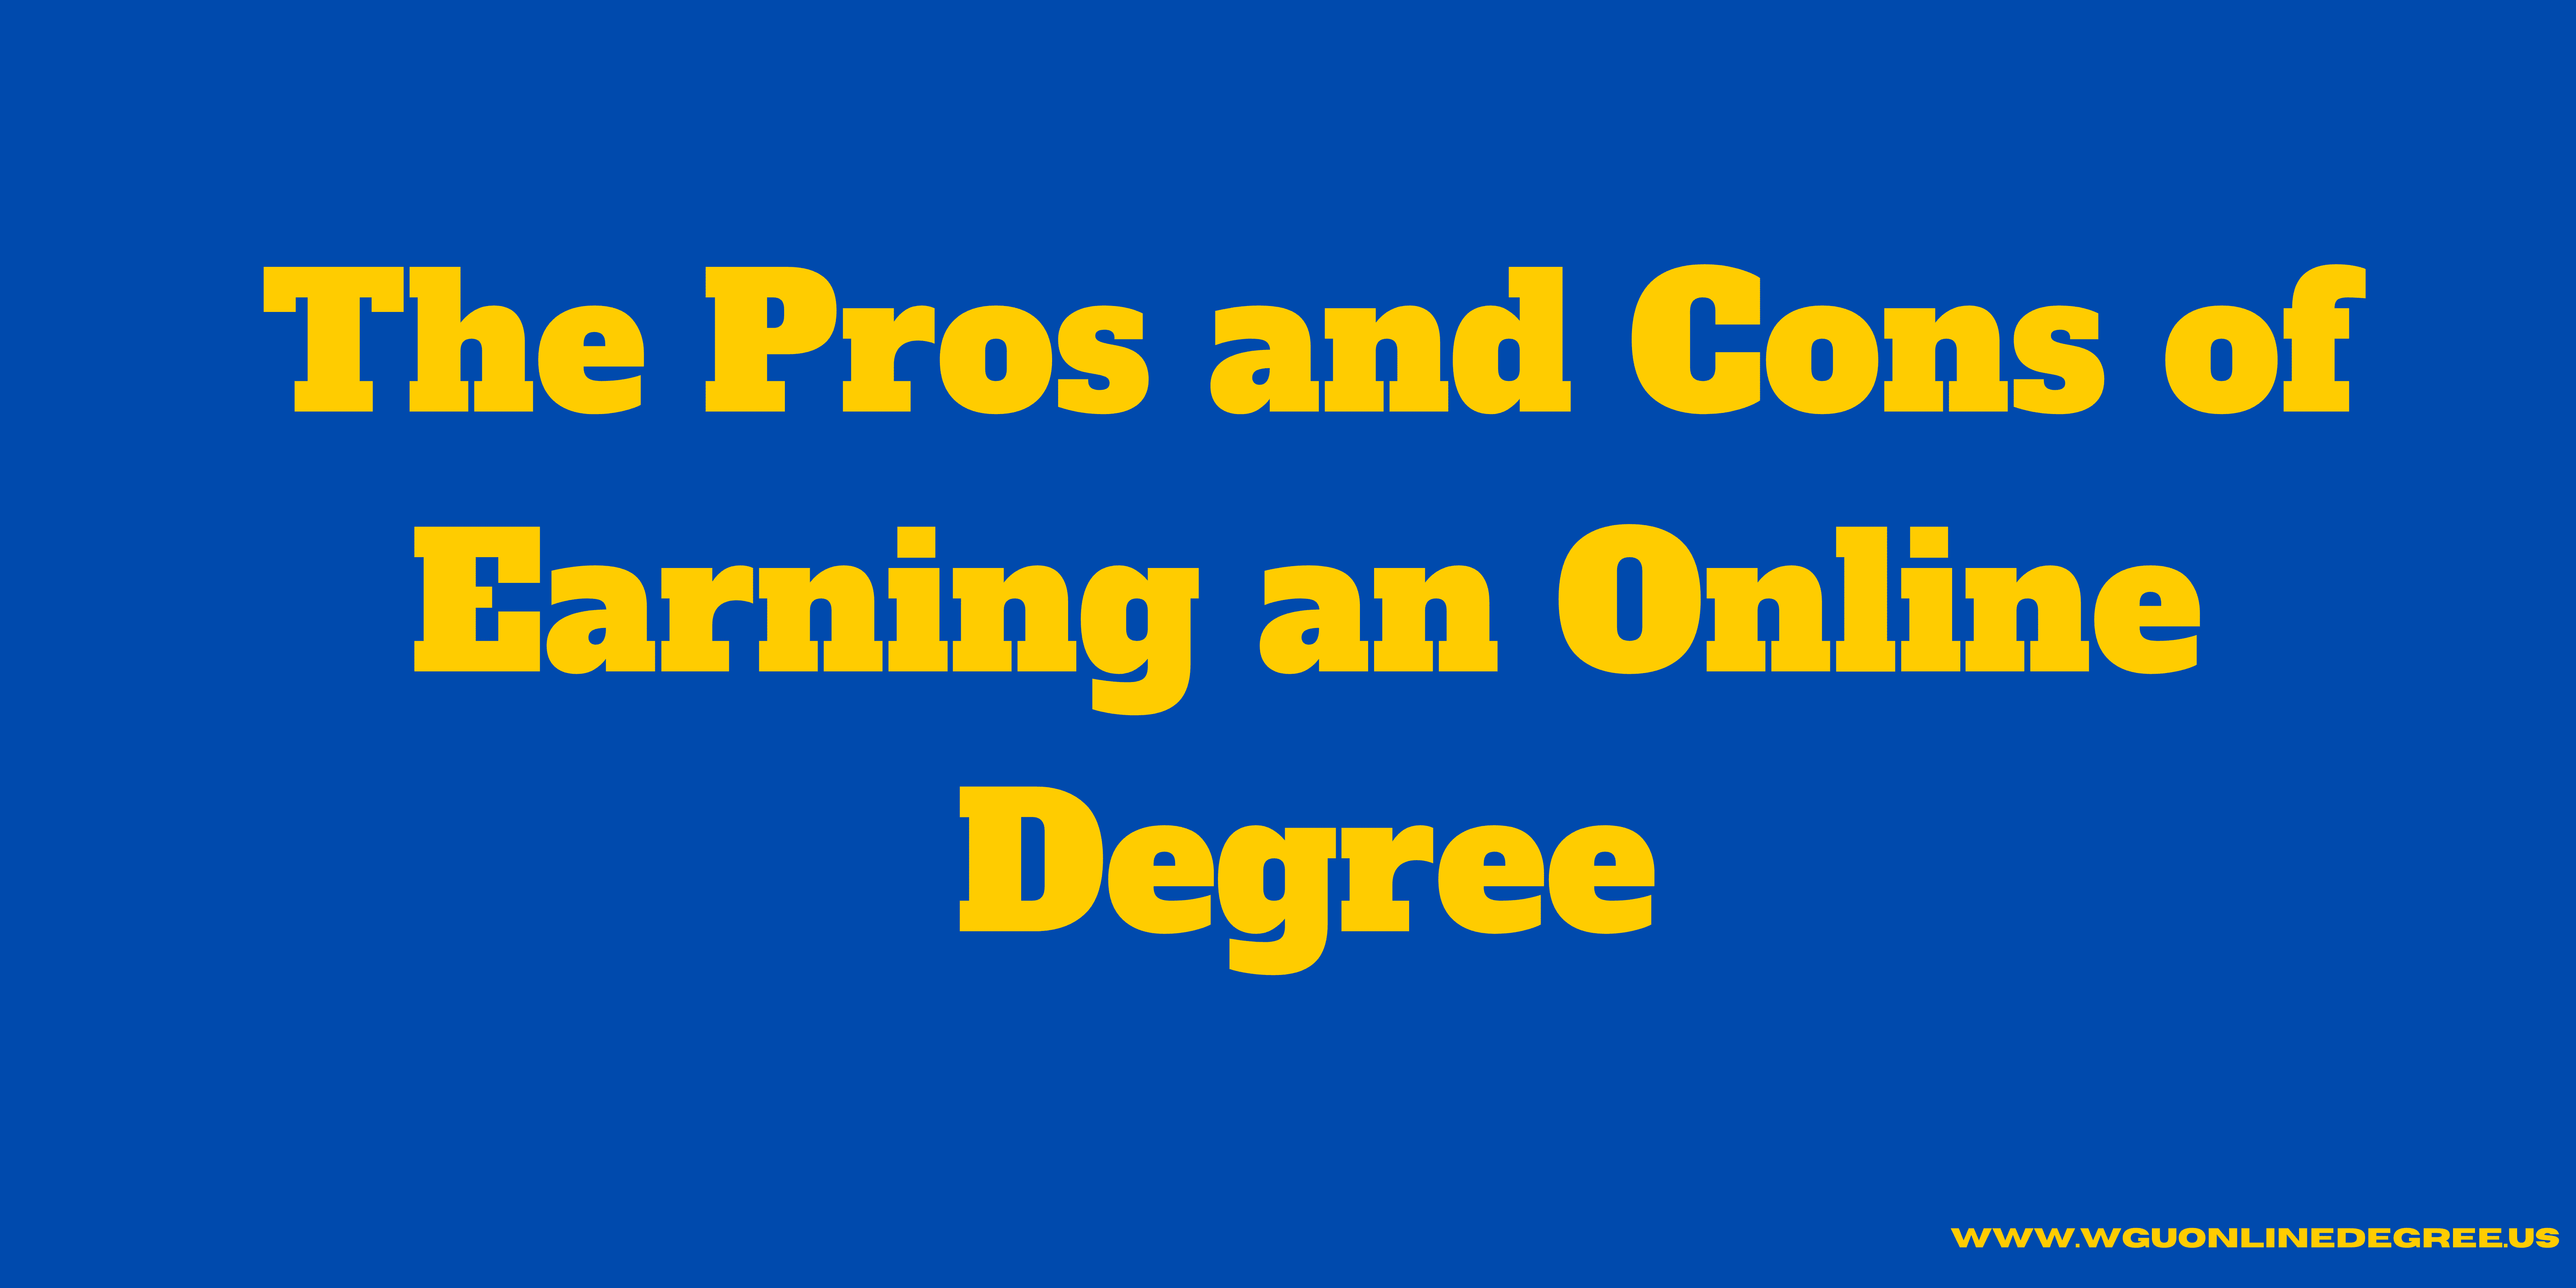 The Pros and Cons of Earning an Online Degree